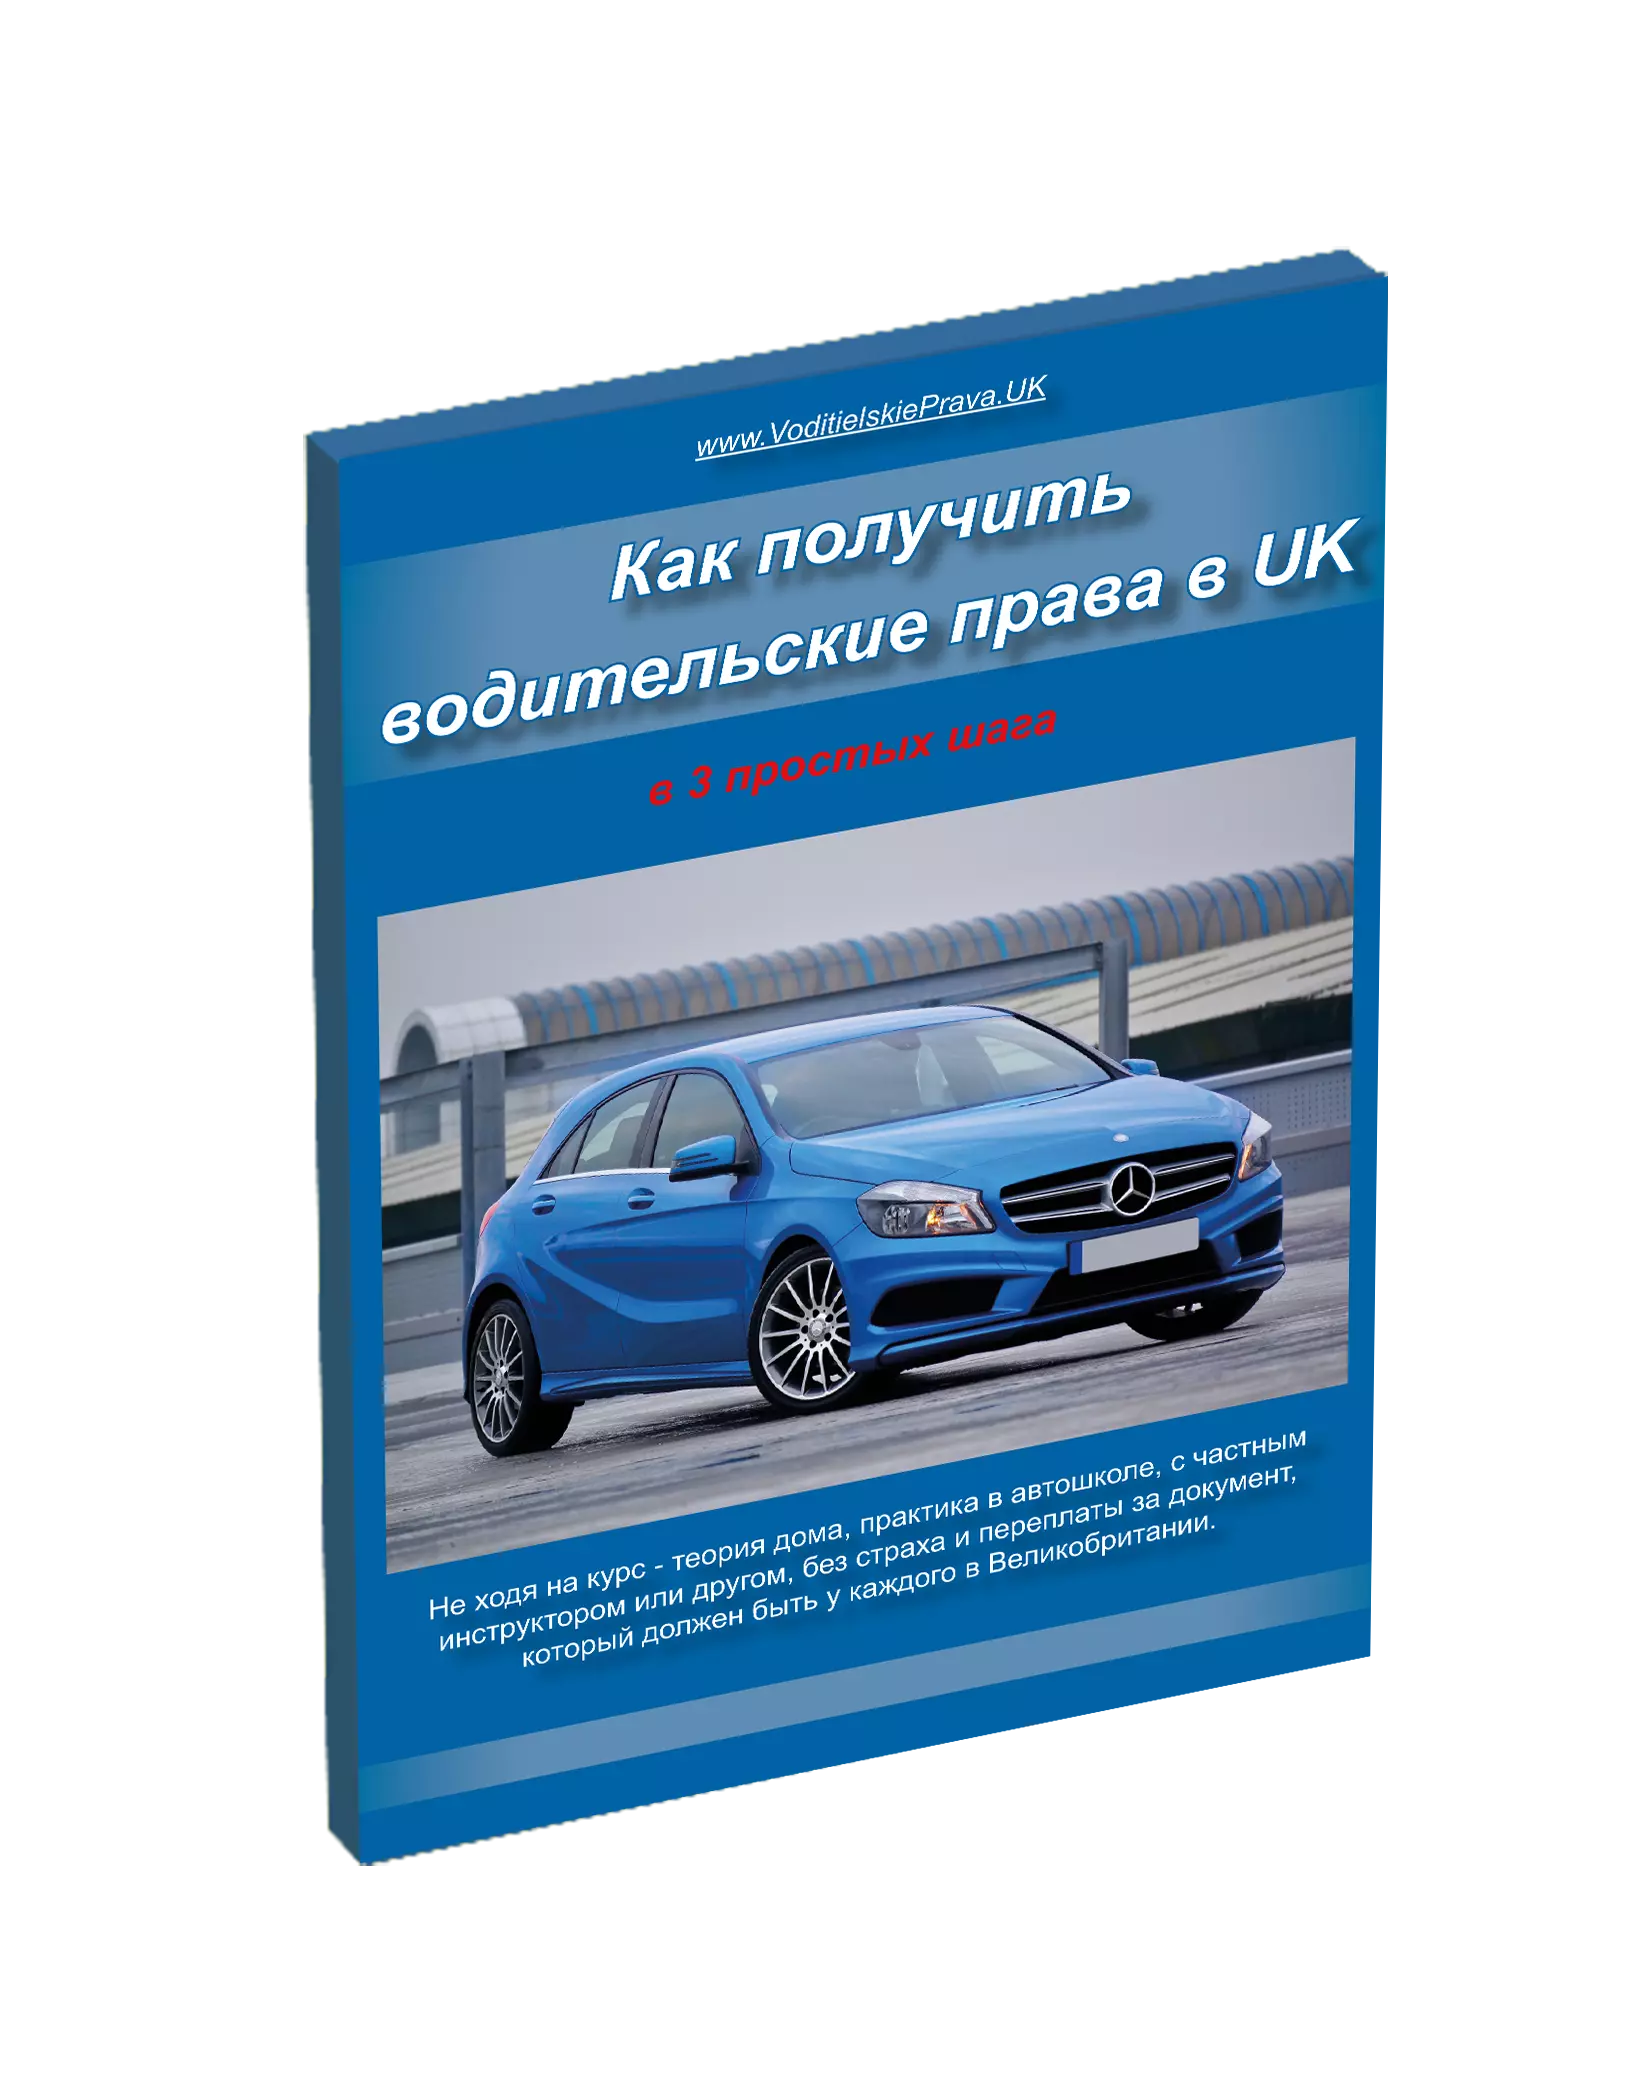 How to get a driving licence in the UK in 3 easy steps in russian language